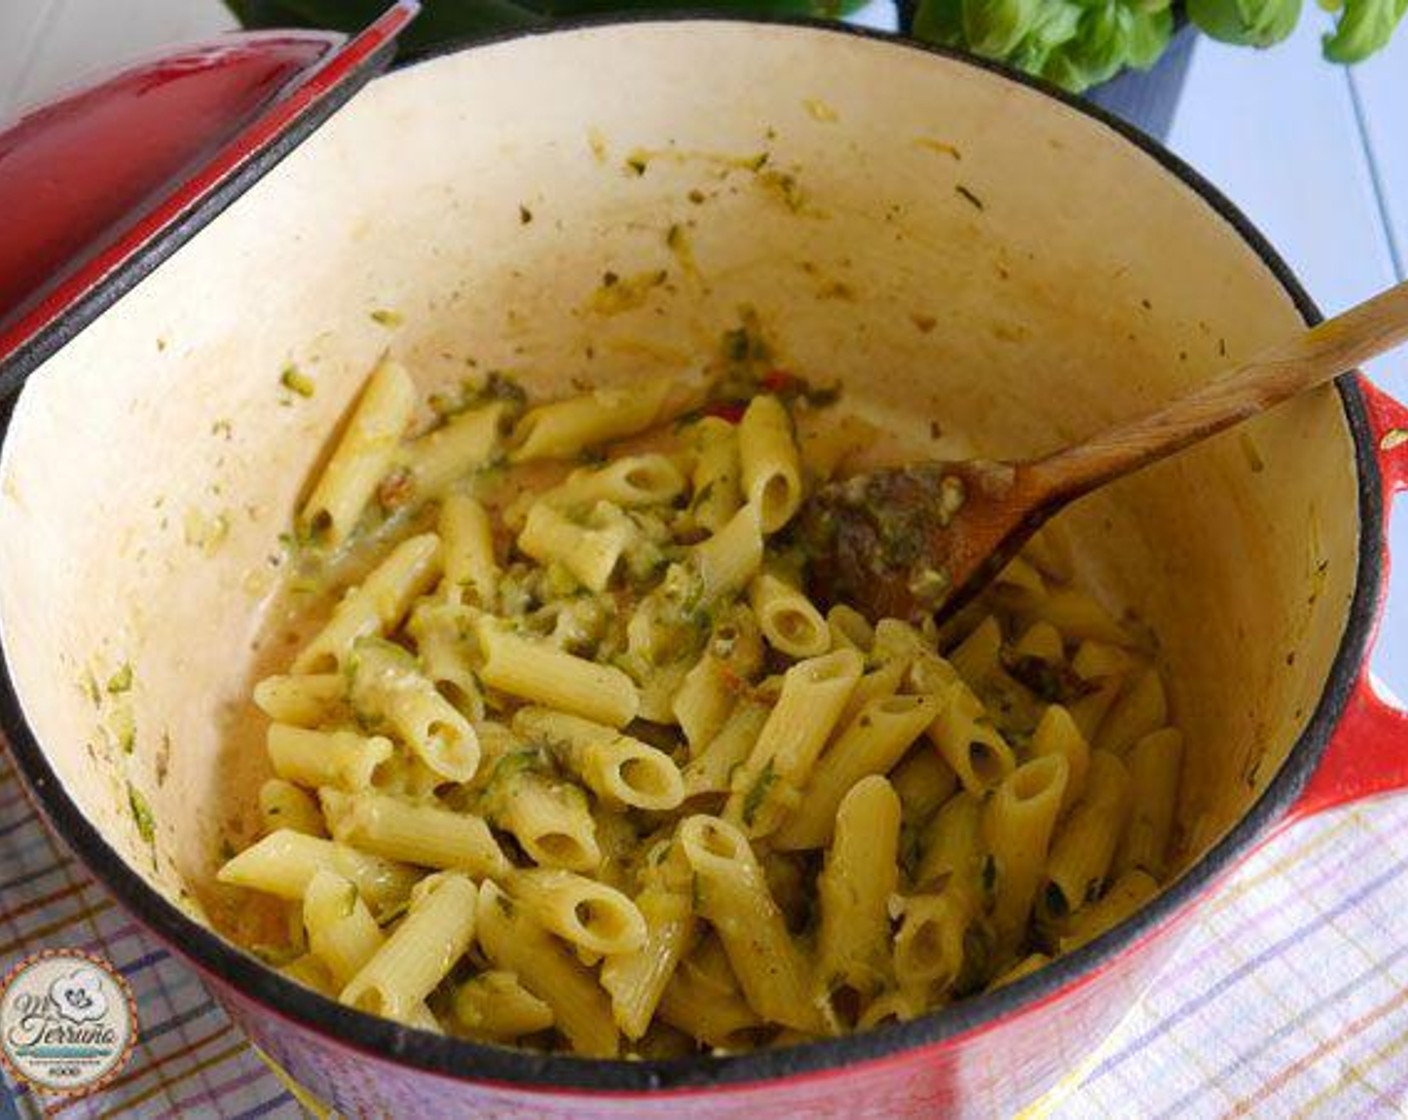 Easy One Pot Pasta Courgette